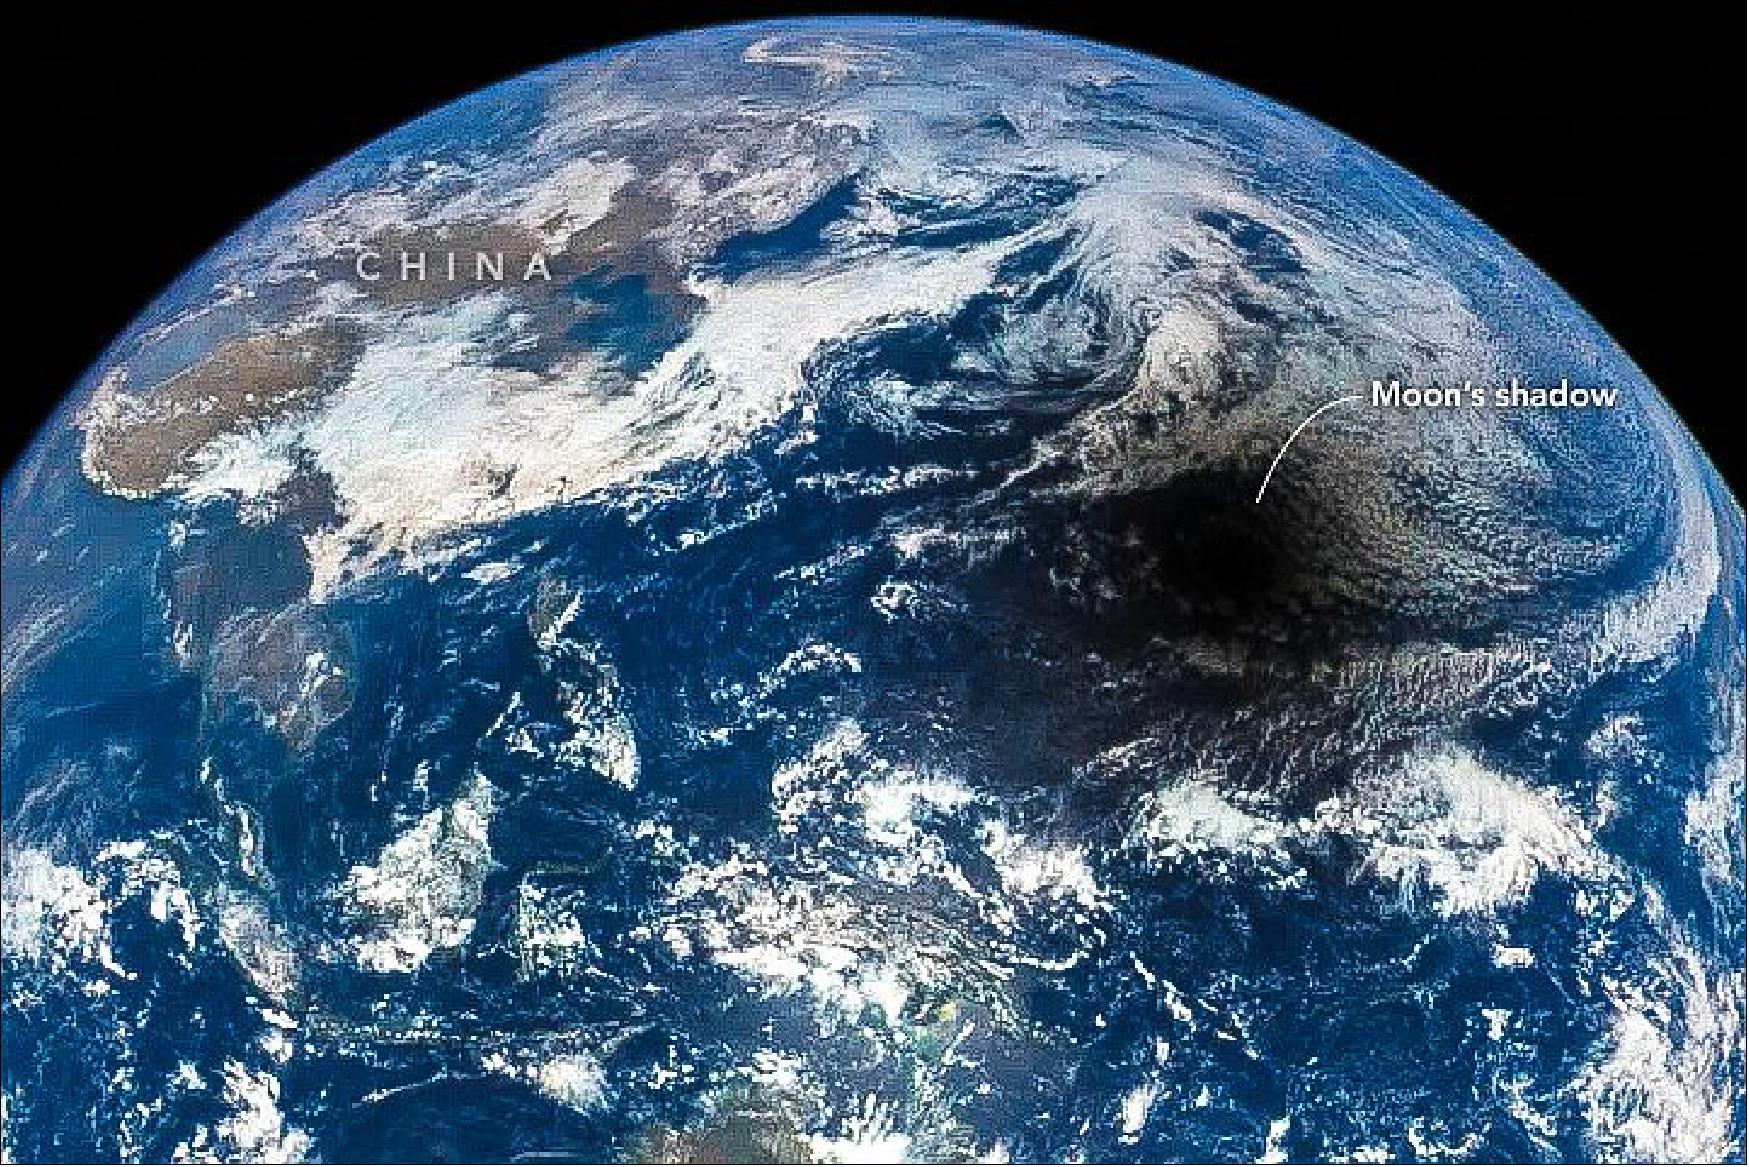 Figure 33: The moon's shadow on Earth as seen from the EPIC instrument on the DSCOVR satellite at L1 during the total solar eclipse on March 9, 2016 (image credit: NASA Earth Observatory)